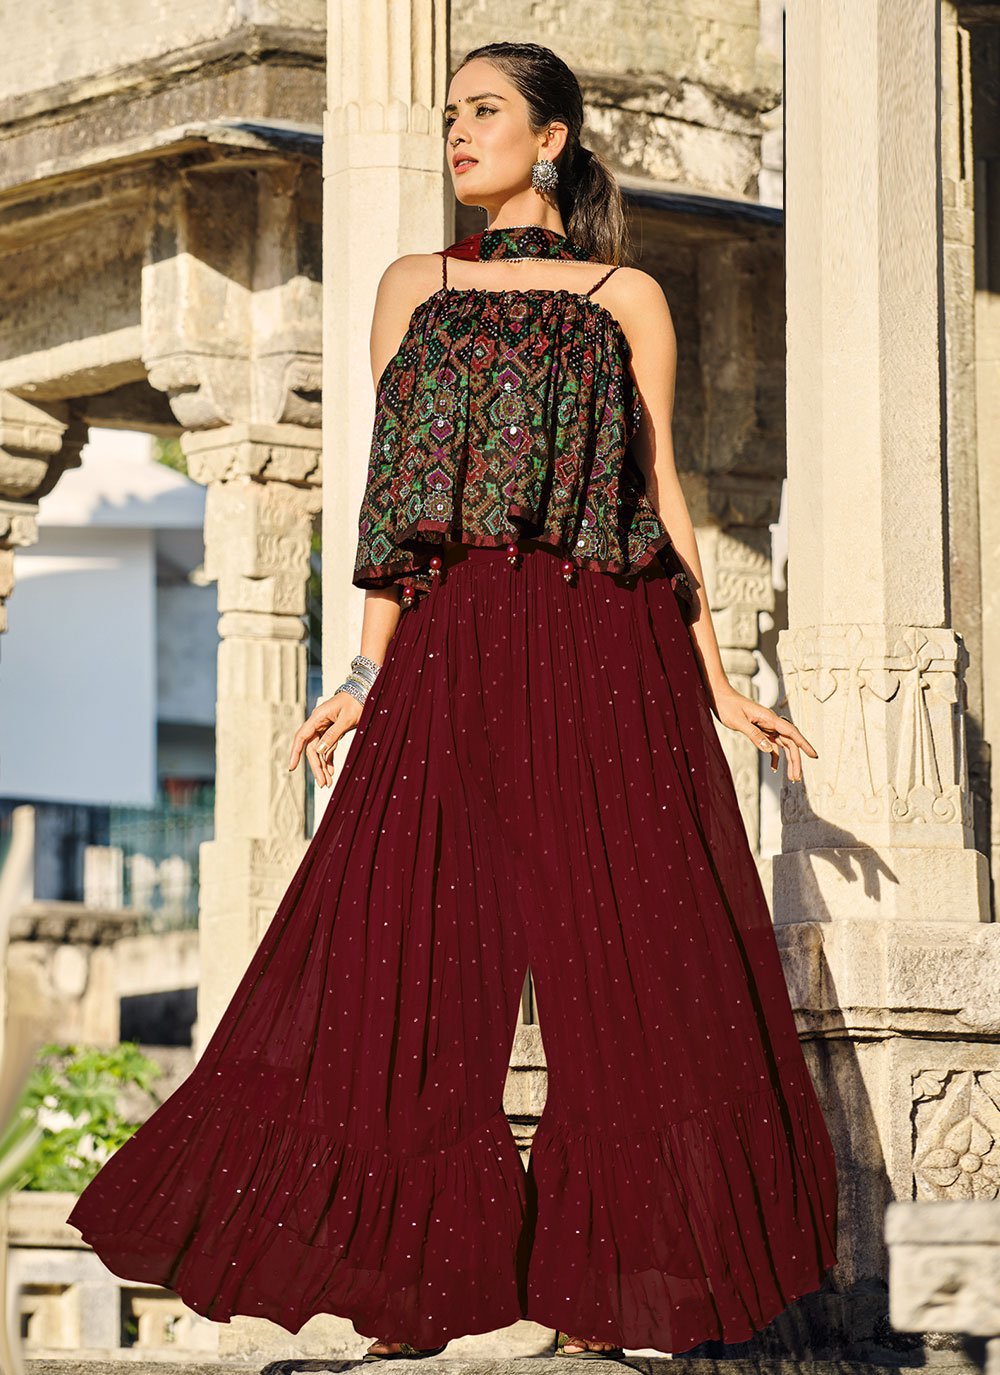 15 Trending Models of Palazzo Salwar Suits That Will Impress You